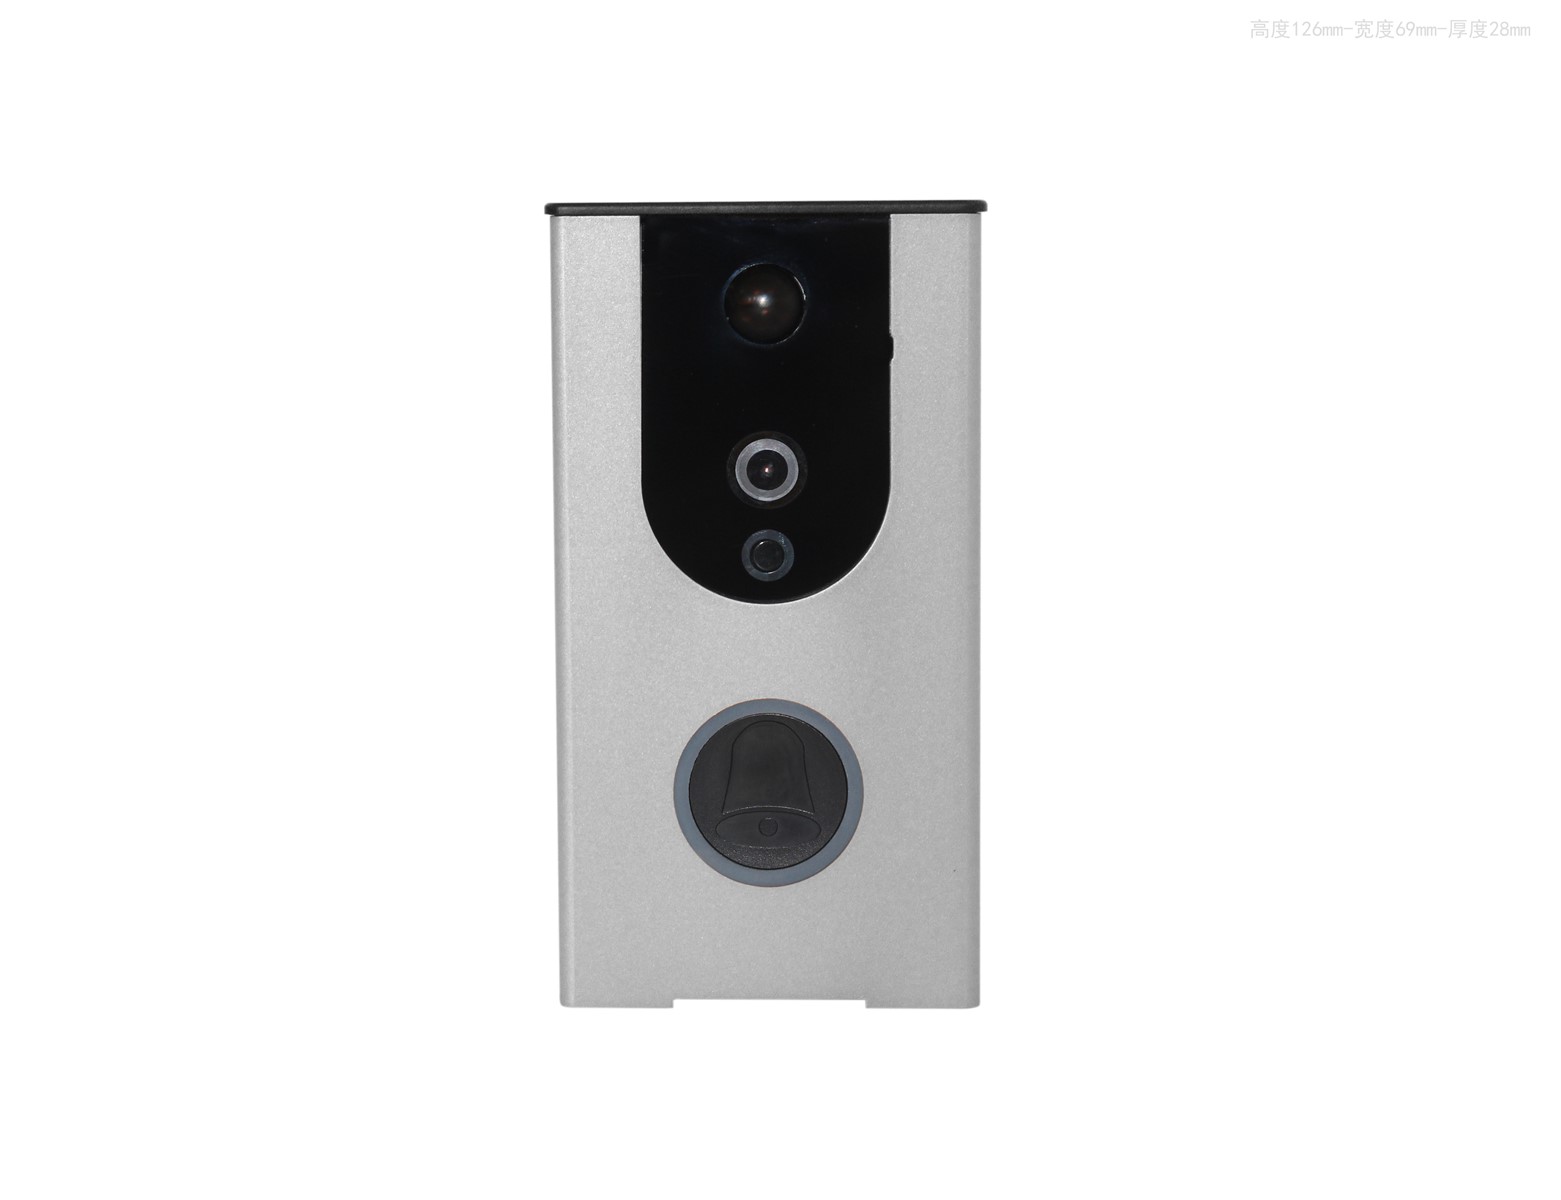 Smart doorbell wifi with Low Power Consumption built in FT card